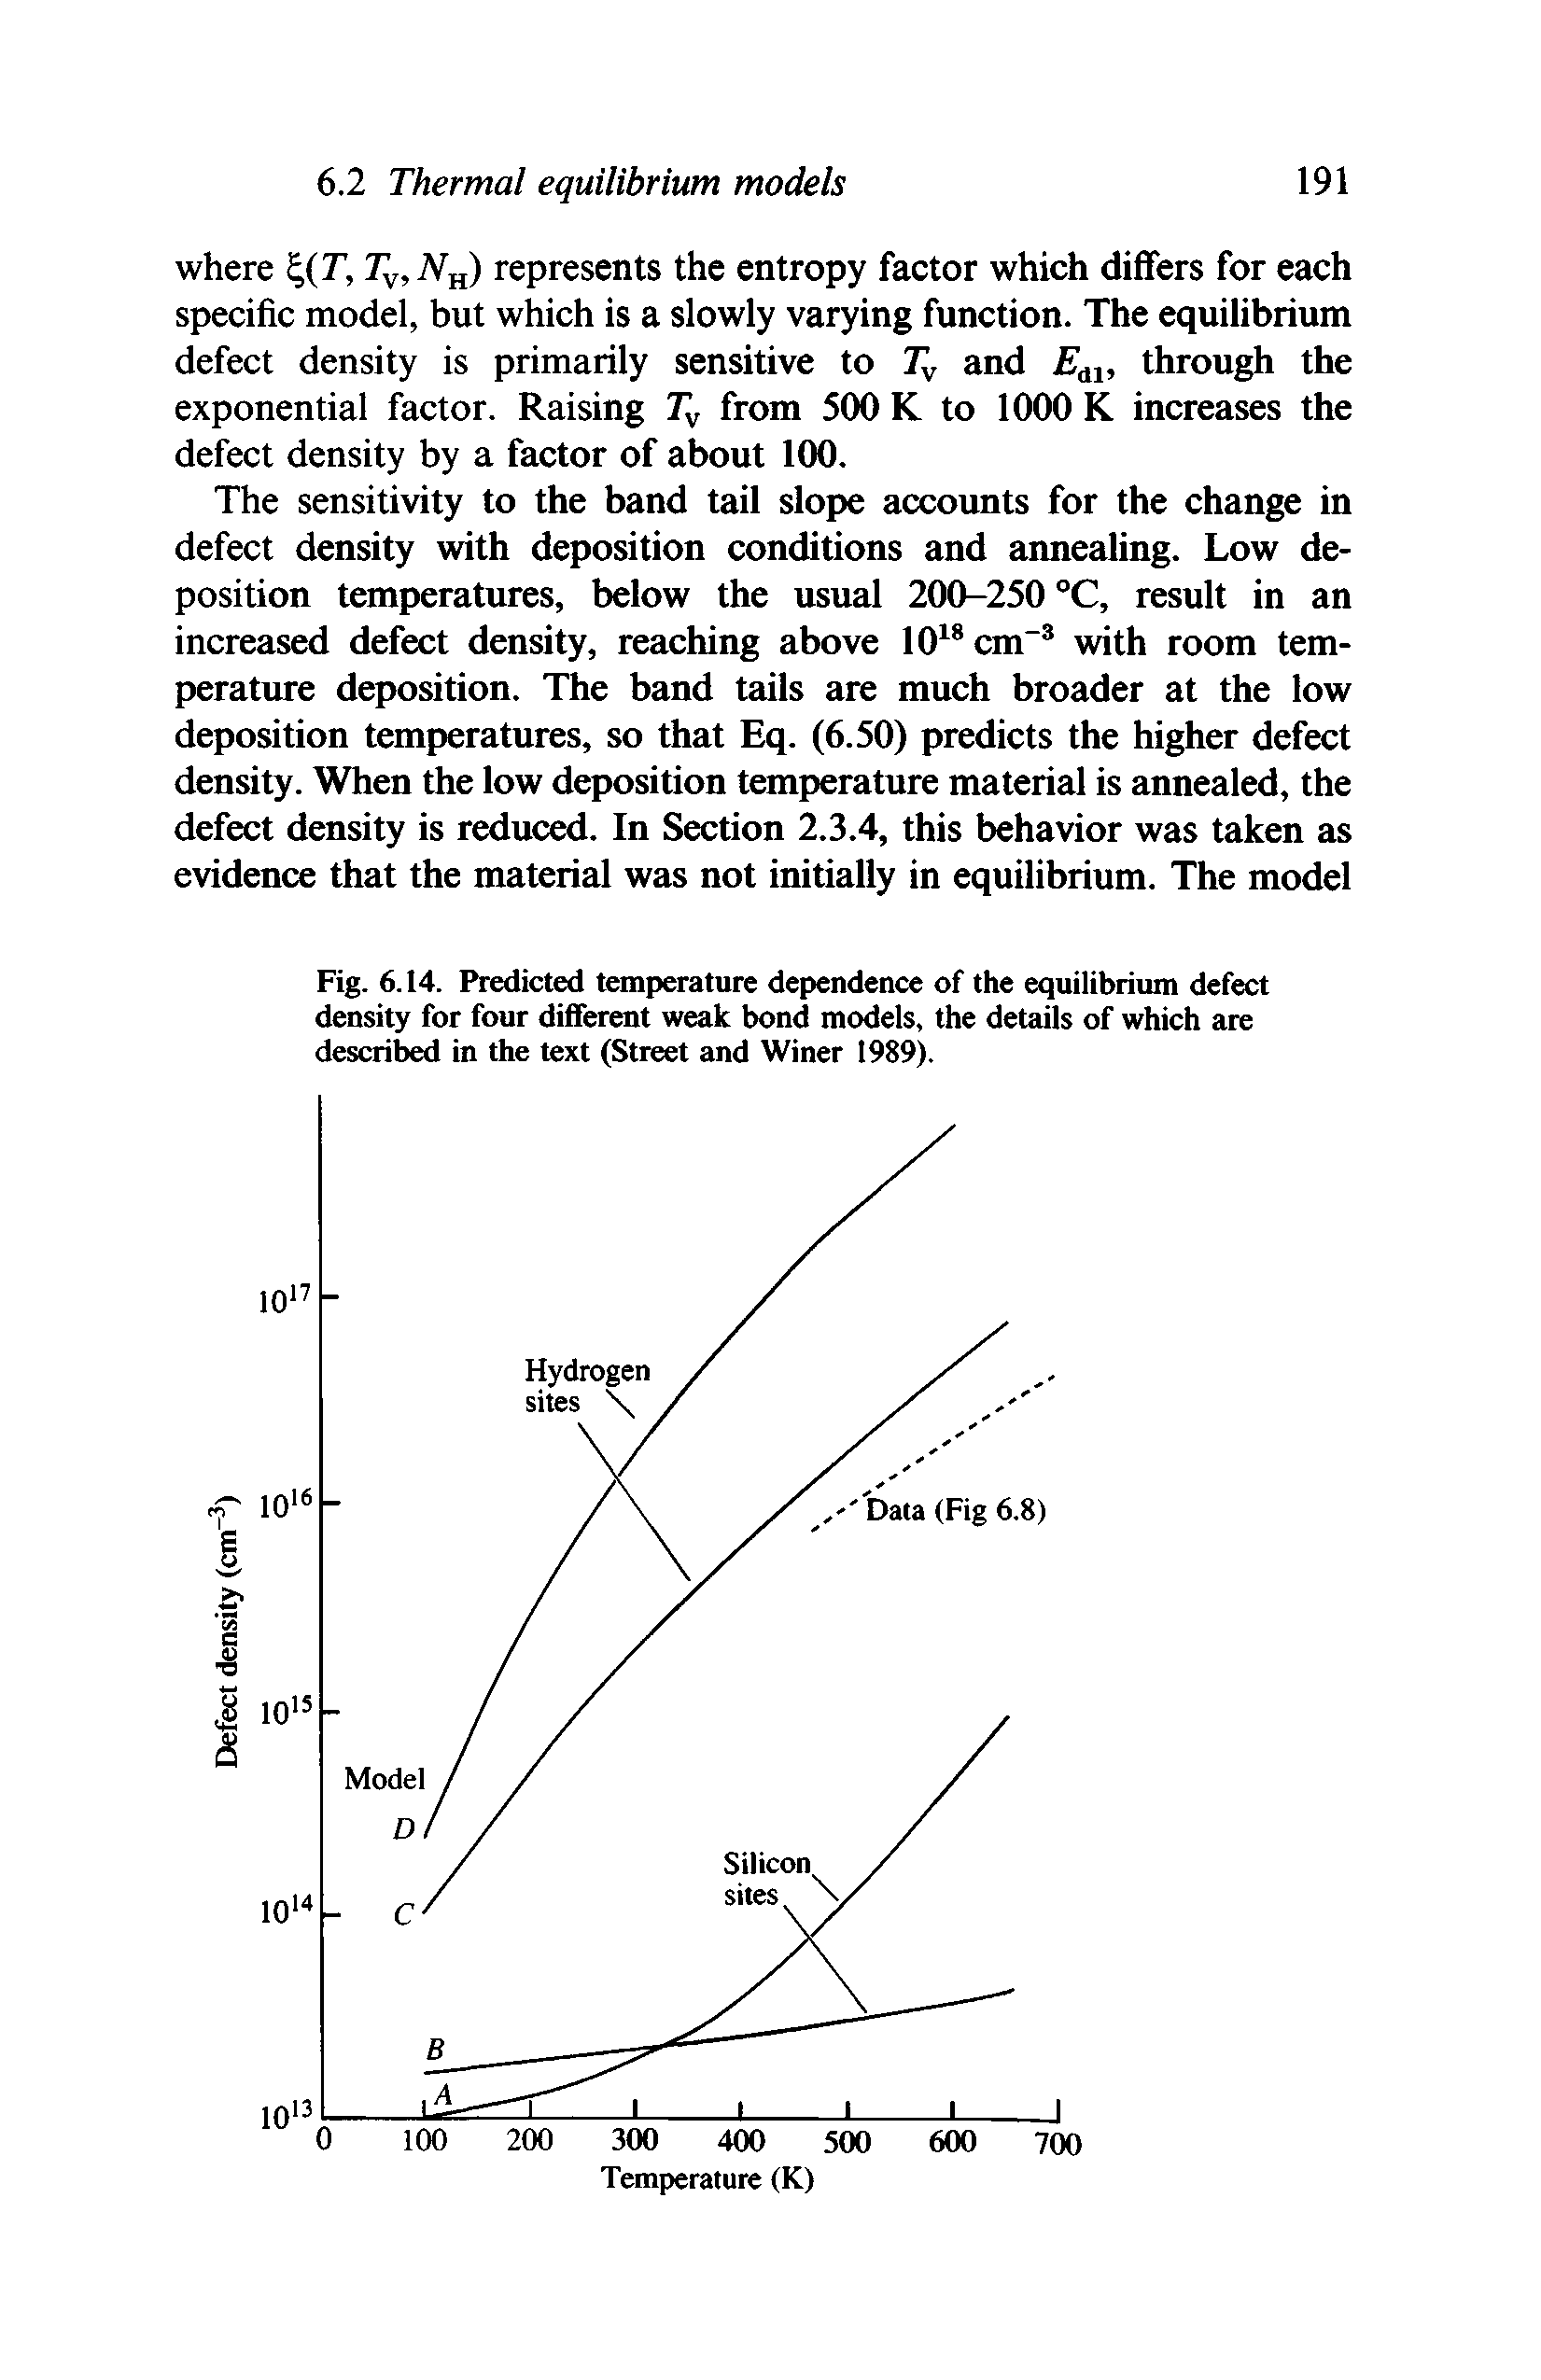 Fig. 6.14. Predicted temperature dependence of the equilibrium defect density for four different weak bond models, the details of which are deseribed in the text (Street and Winer 1989).